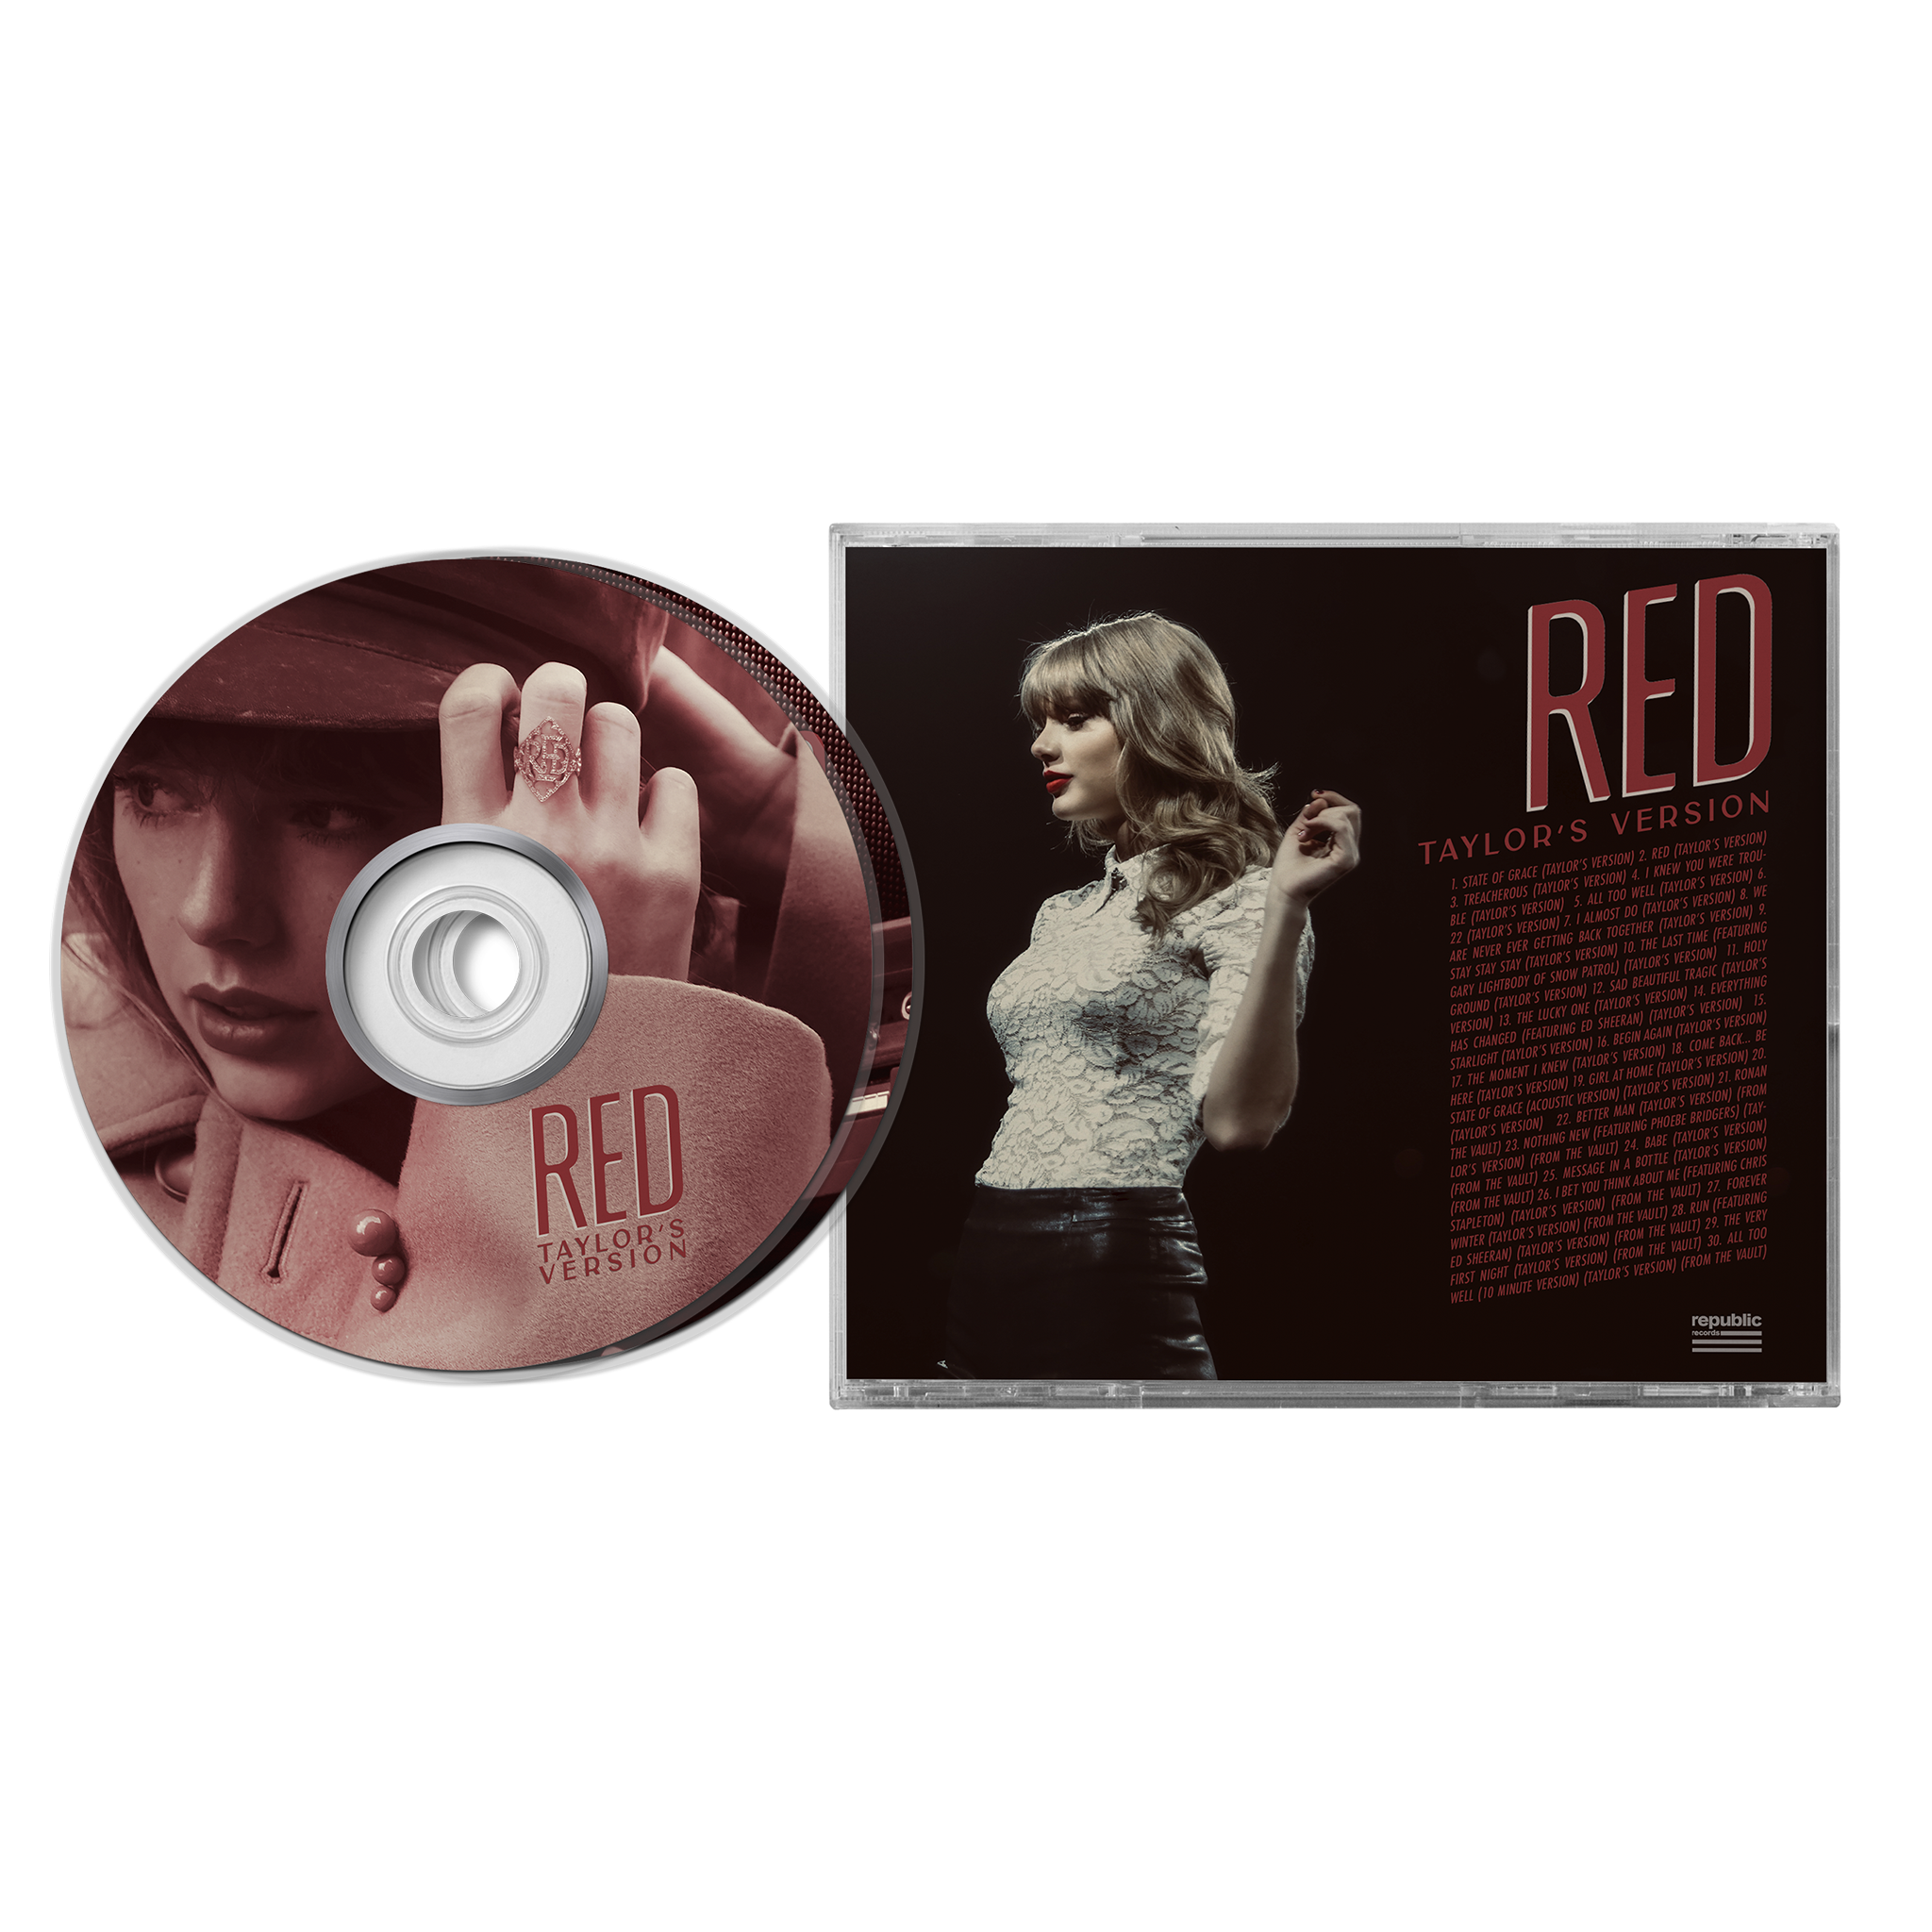 Red (Taylor's Version) Shop - Taylor Swift Official Store